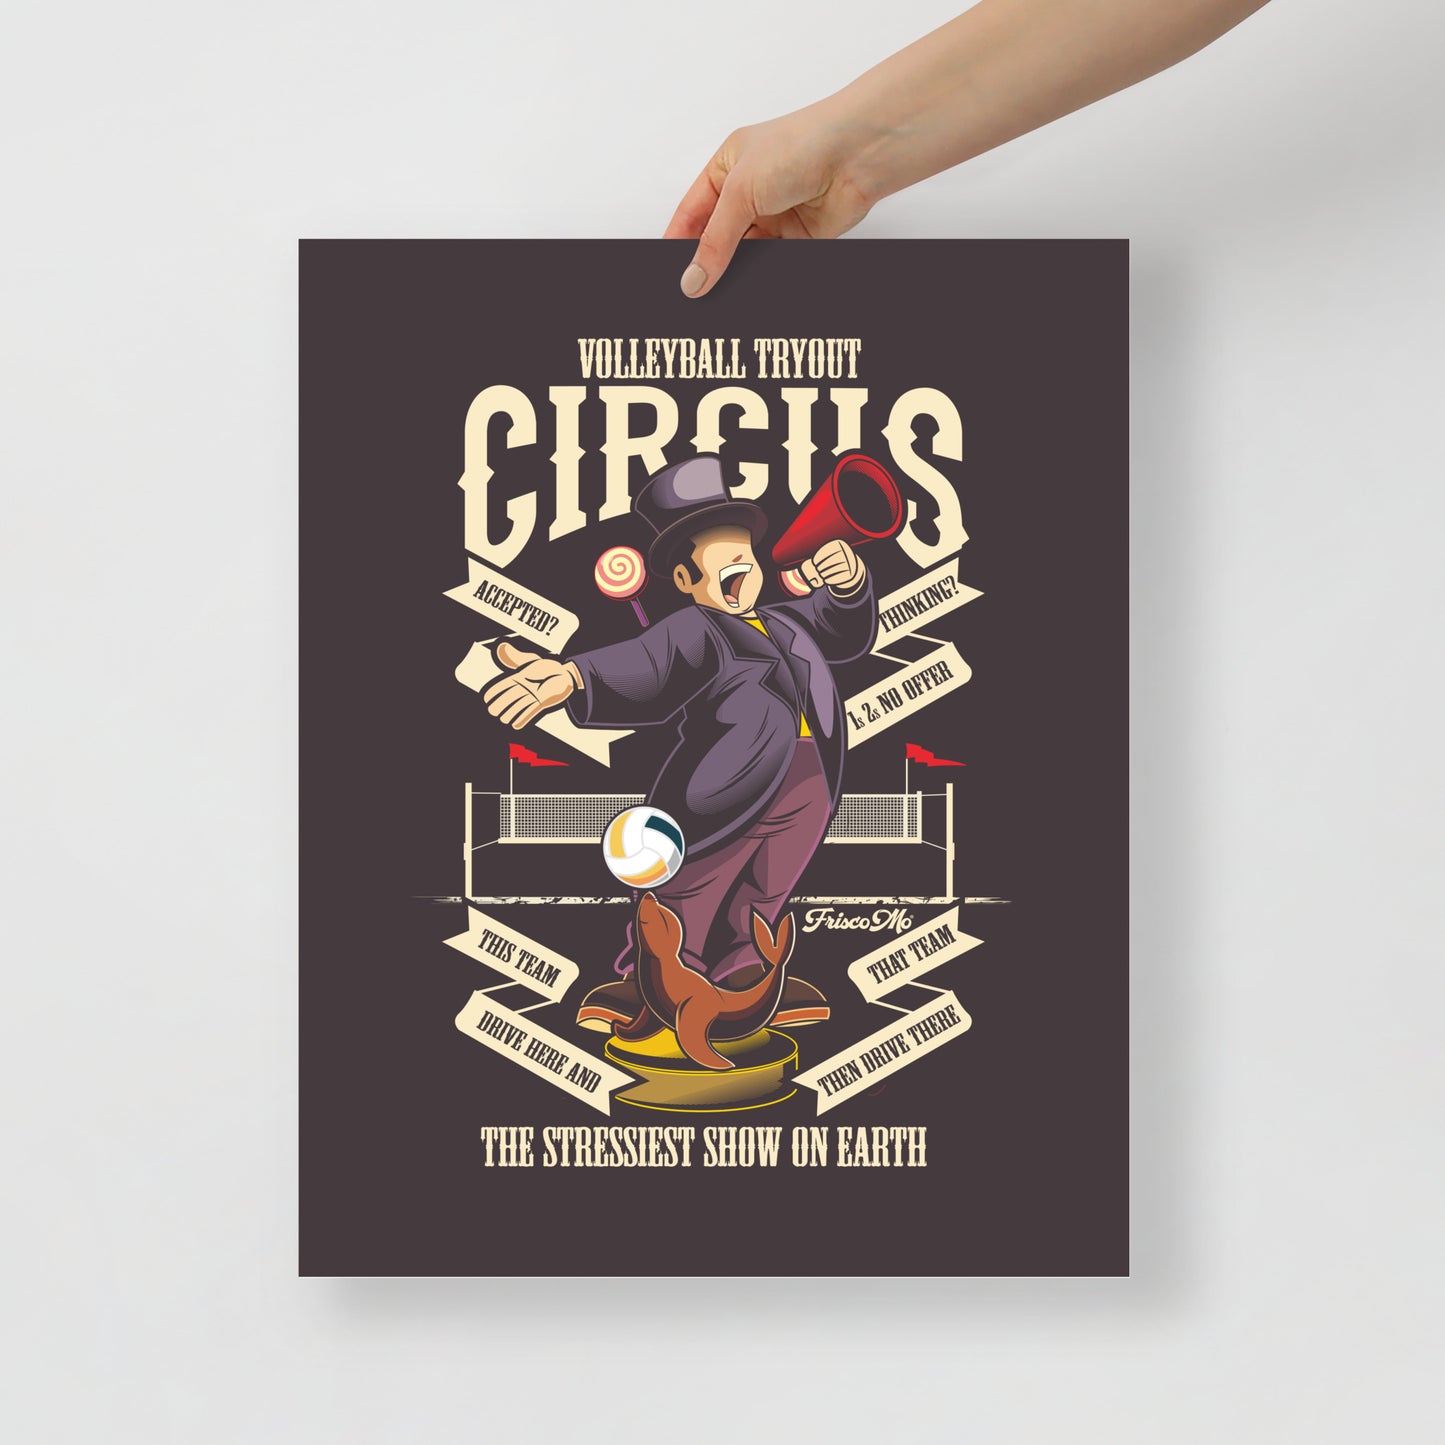 Volleyball Tryout Circus Poster